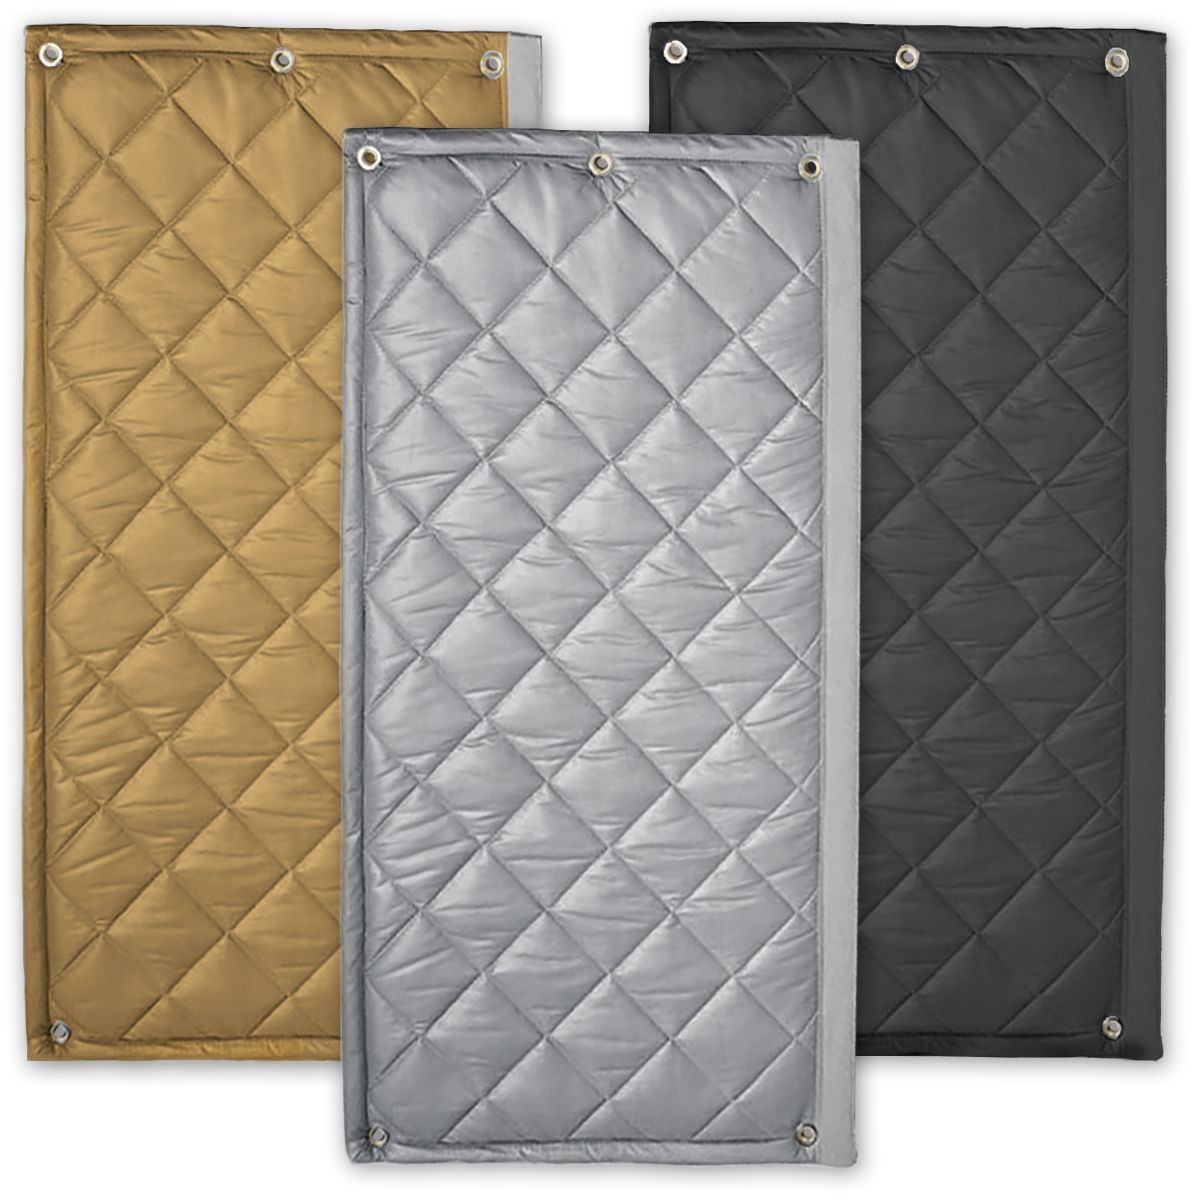 Acoustic Blankets Applications